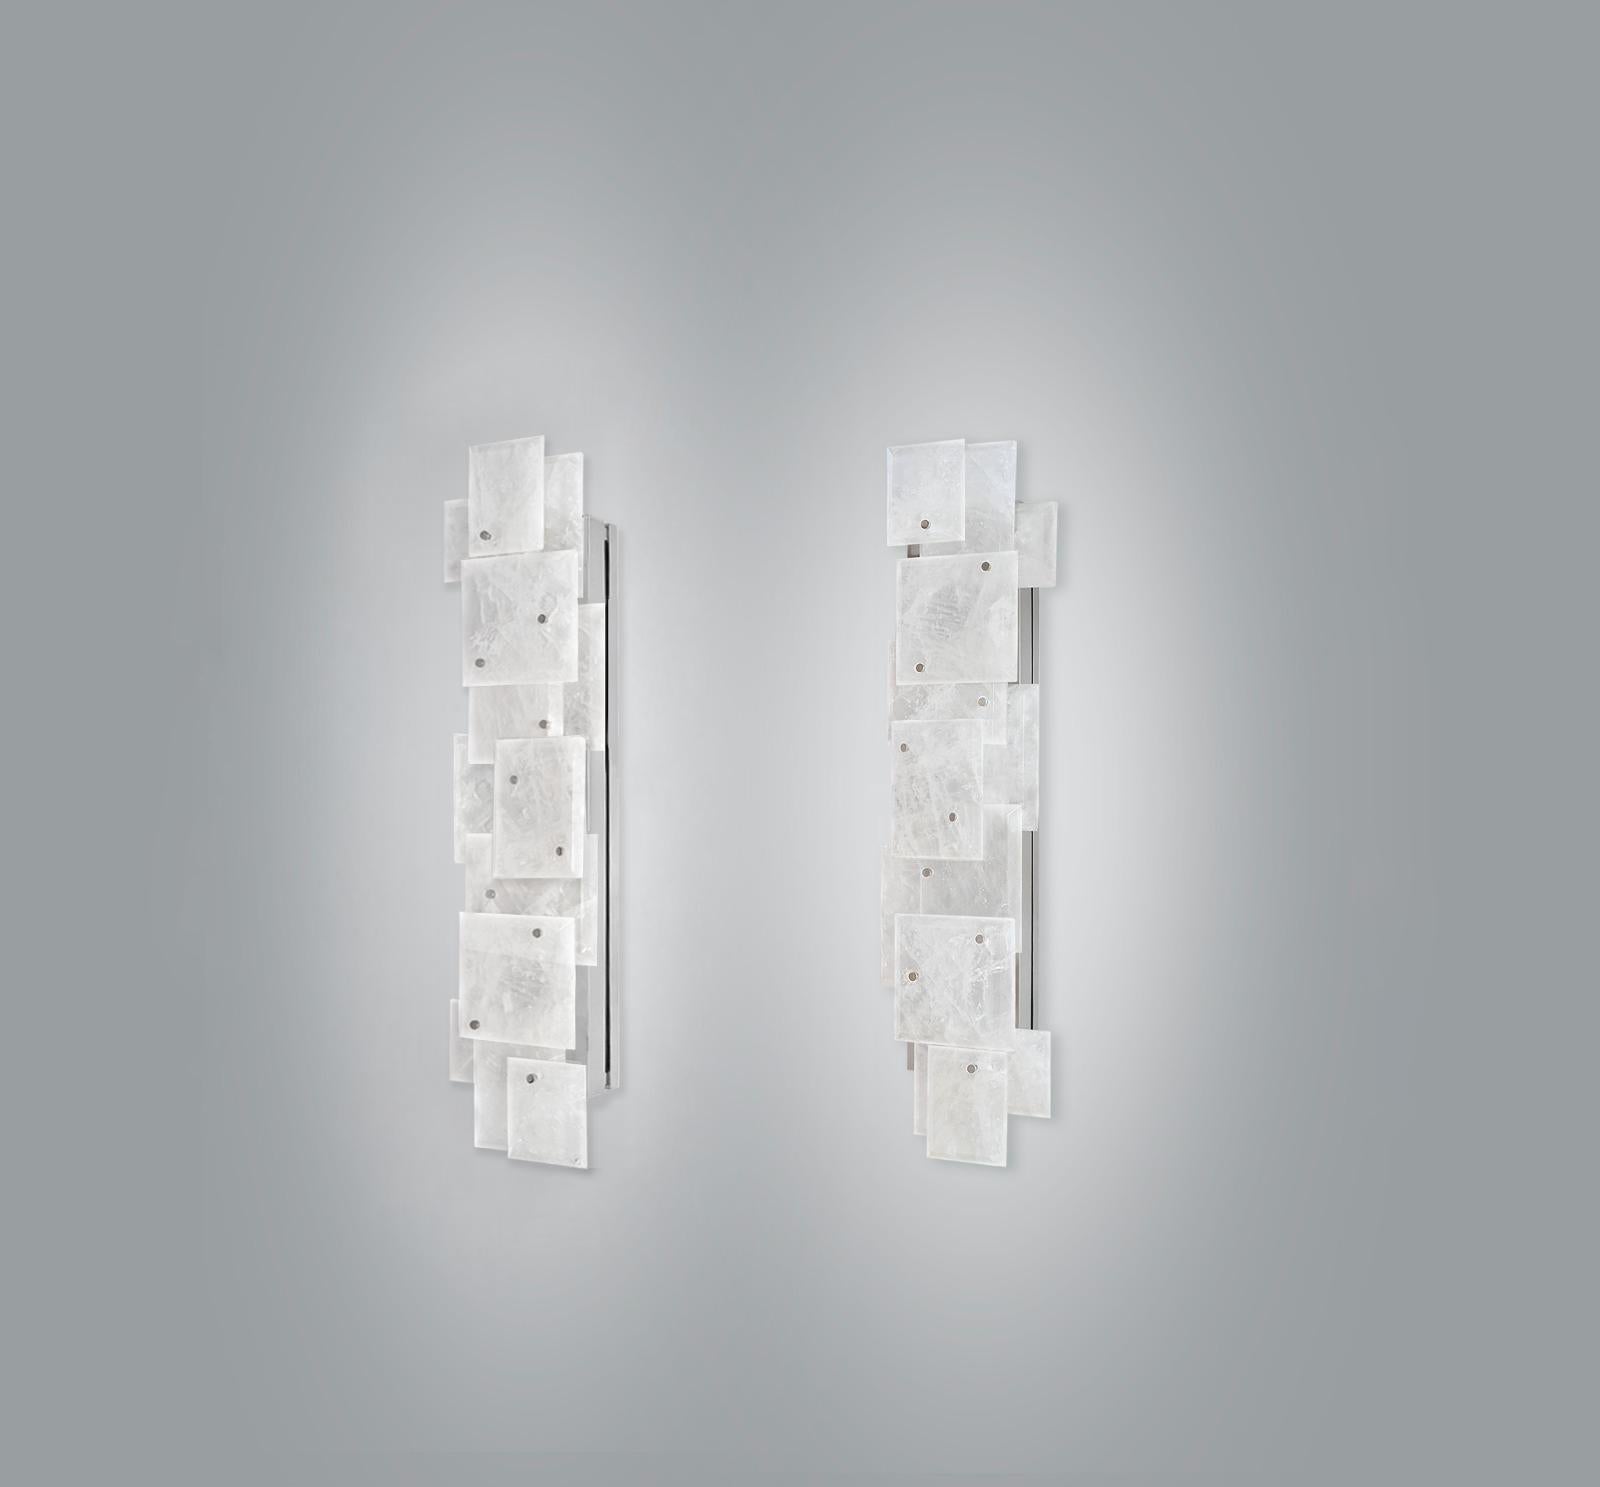 Pair of modern rock crystal quartz sconces with multiple panels decorations in matte nickel finish. Created by Phoenix Gallery.
Each sconce installed four sockets, use four 75 watts Led warm light bulbs, 300watts total. Light bulbs supplied.
  